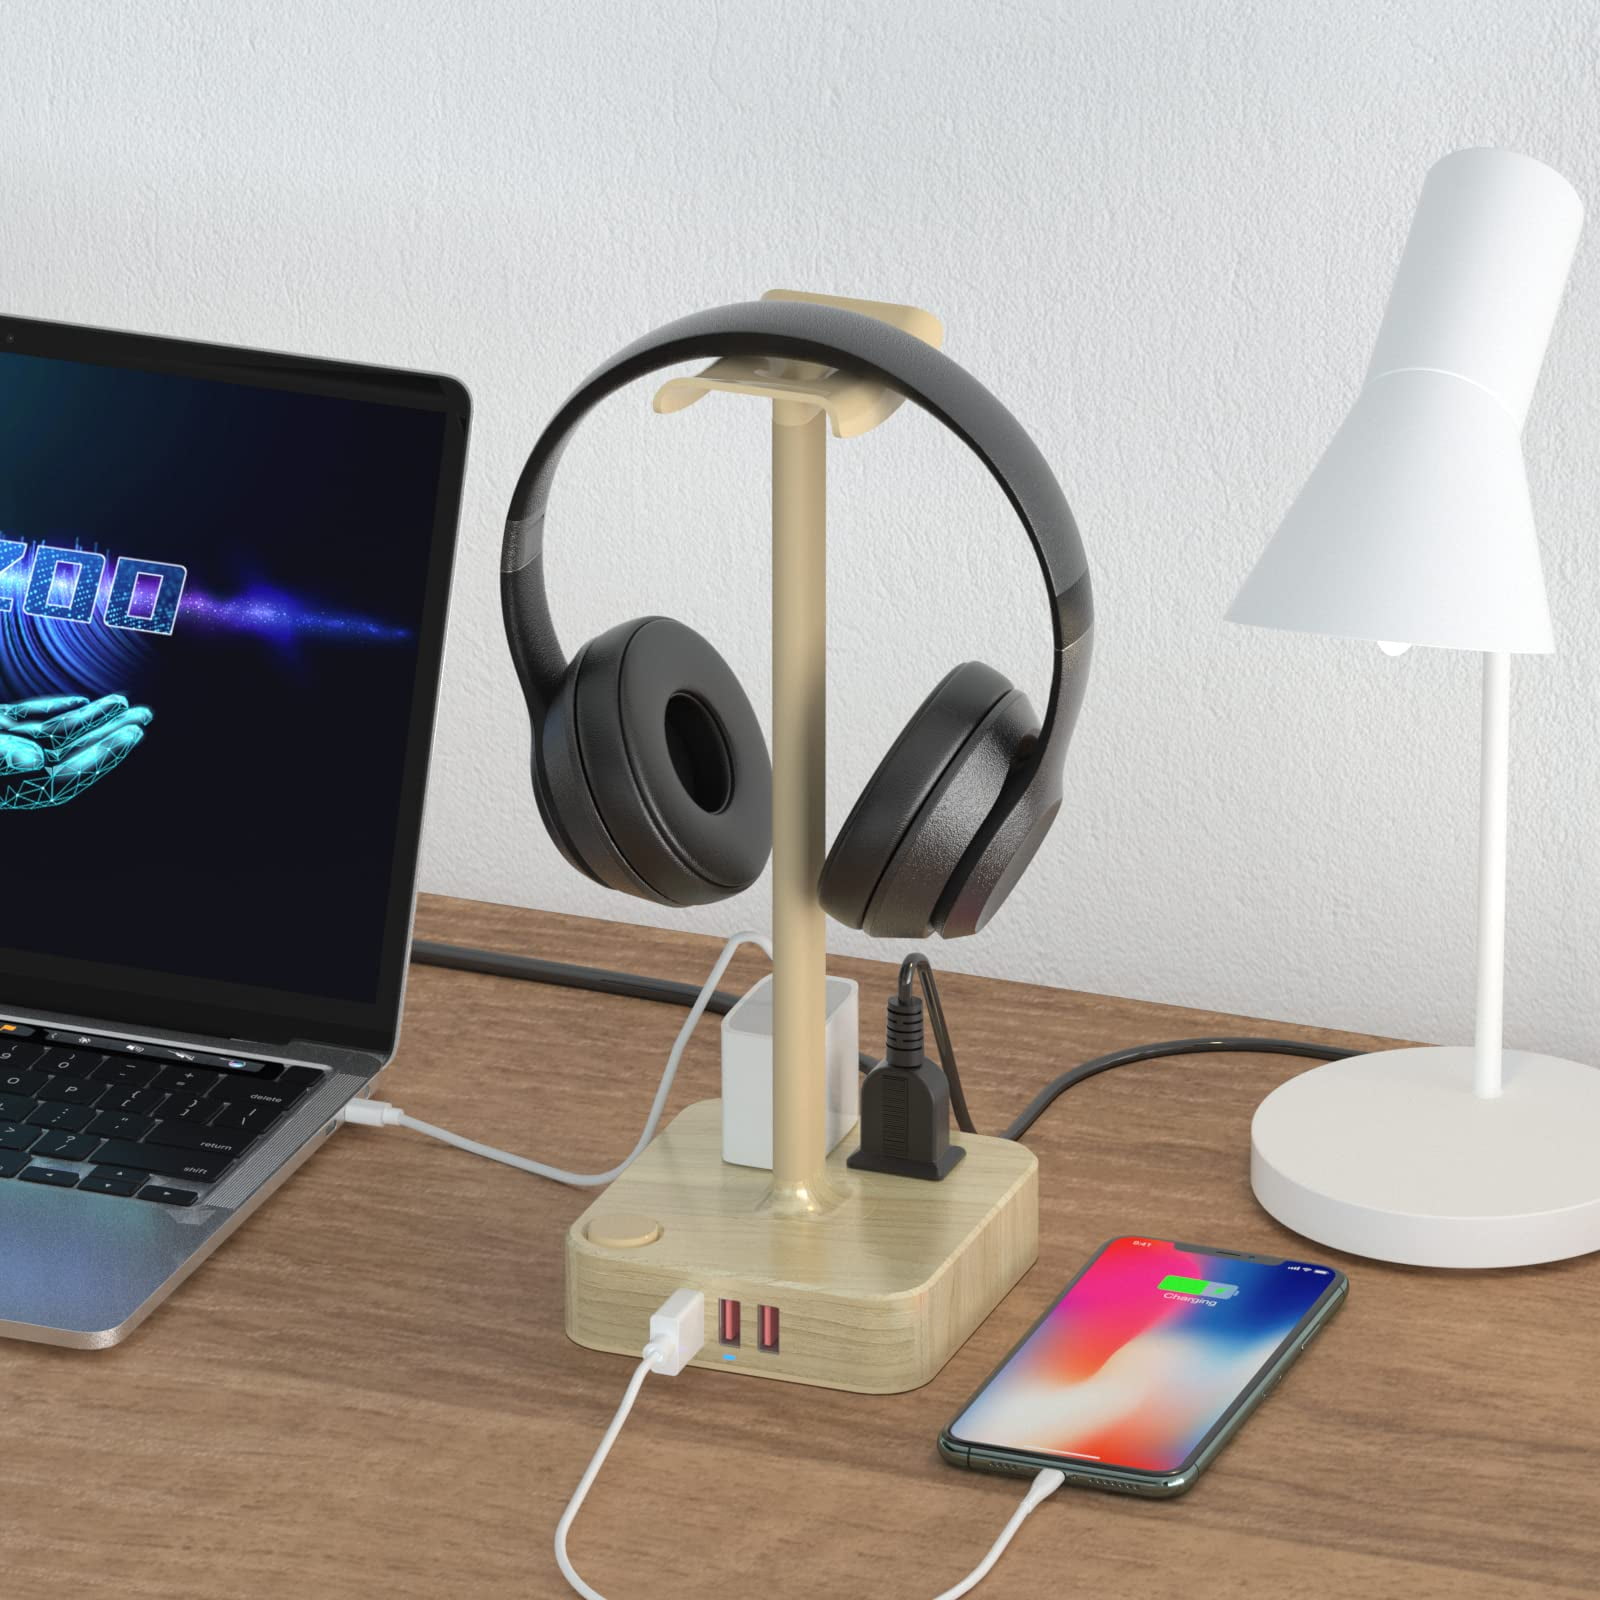 cozoo Headphone Stand with USB Charger Desktop Gaming Headset Holder Hanger  with 3 USB Charger and 2 Outlets - Suitable for Gaming, DJ, Wireless  Earphone Display,Gaming Desk Accessories,Gifts for Him 